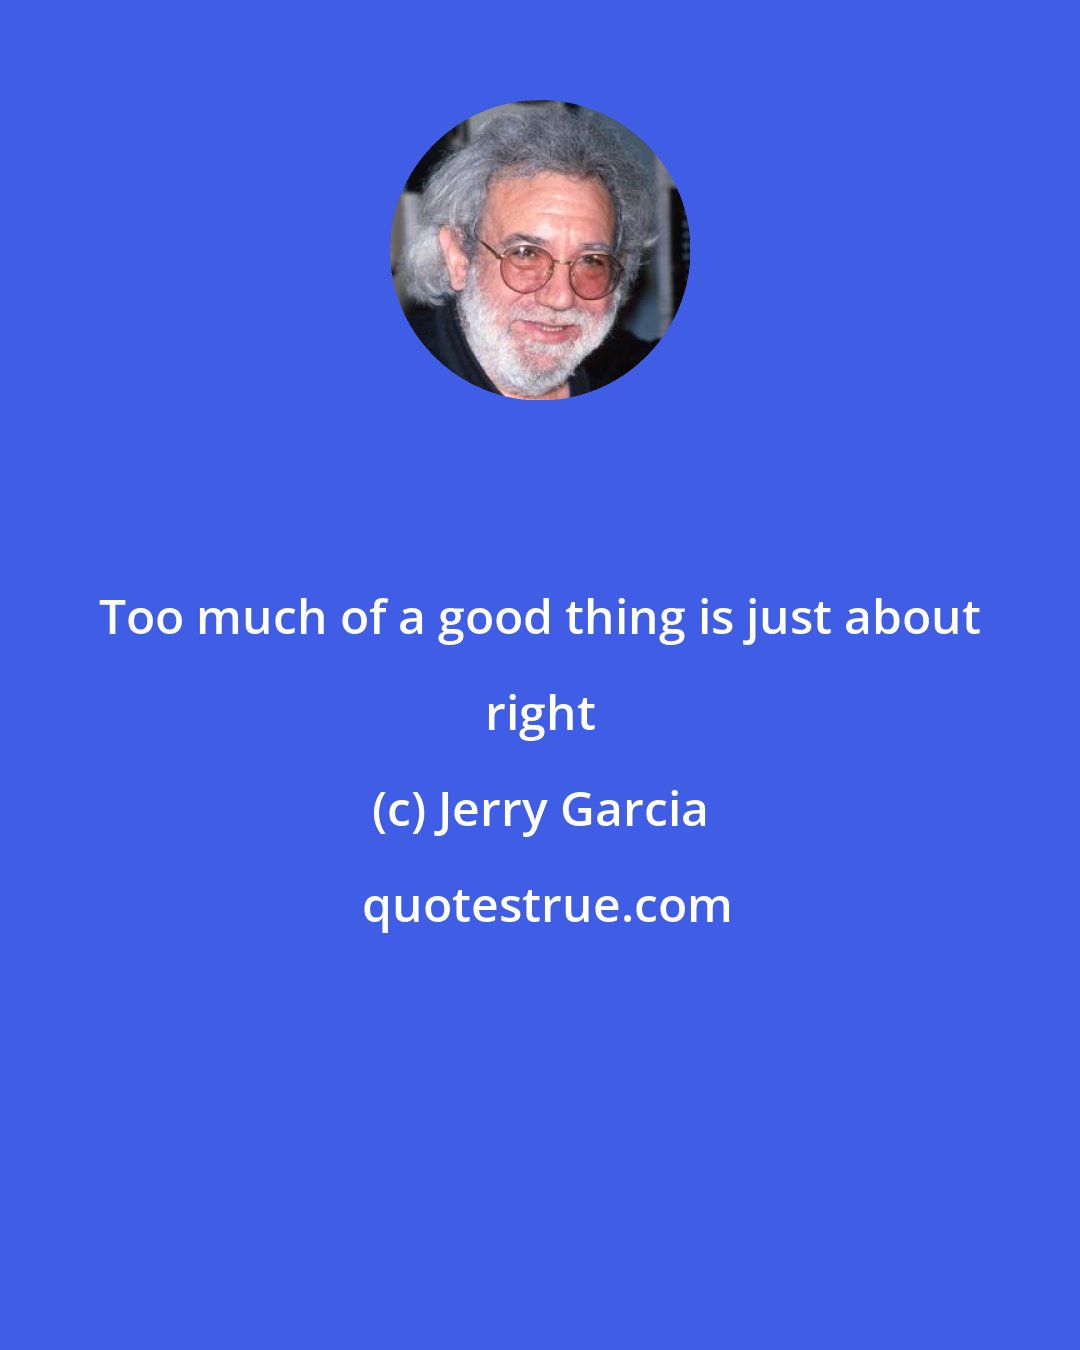 Jerry Garcia: Too much of a good thing is just about right